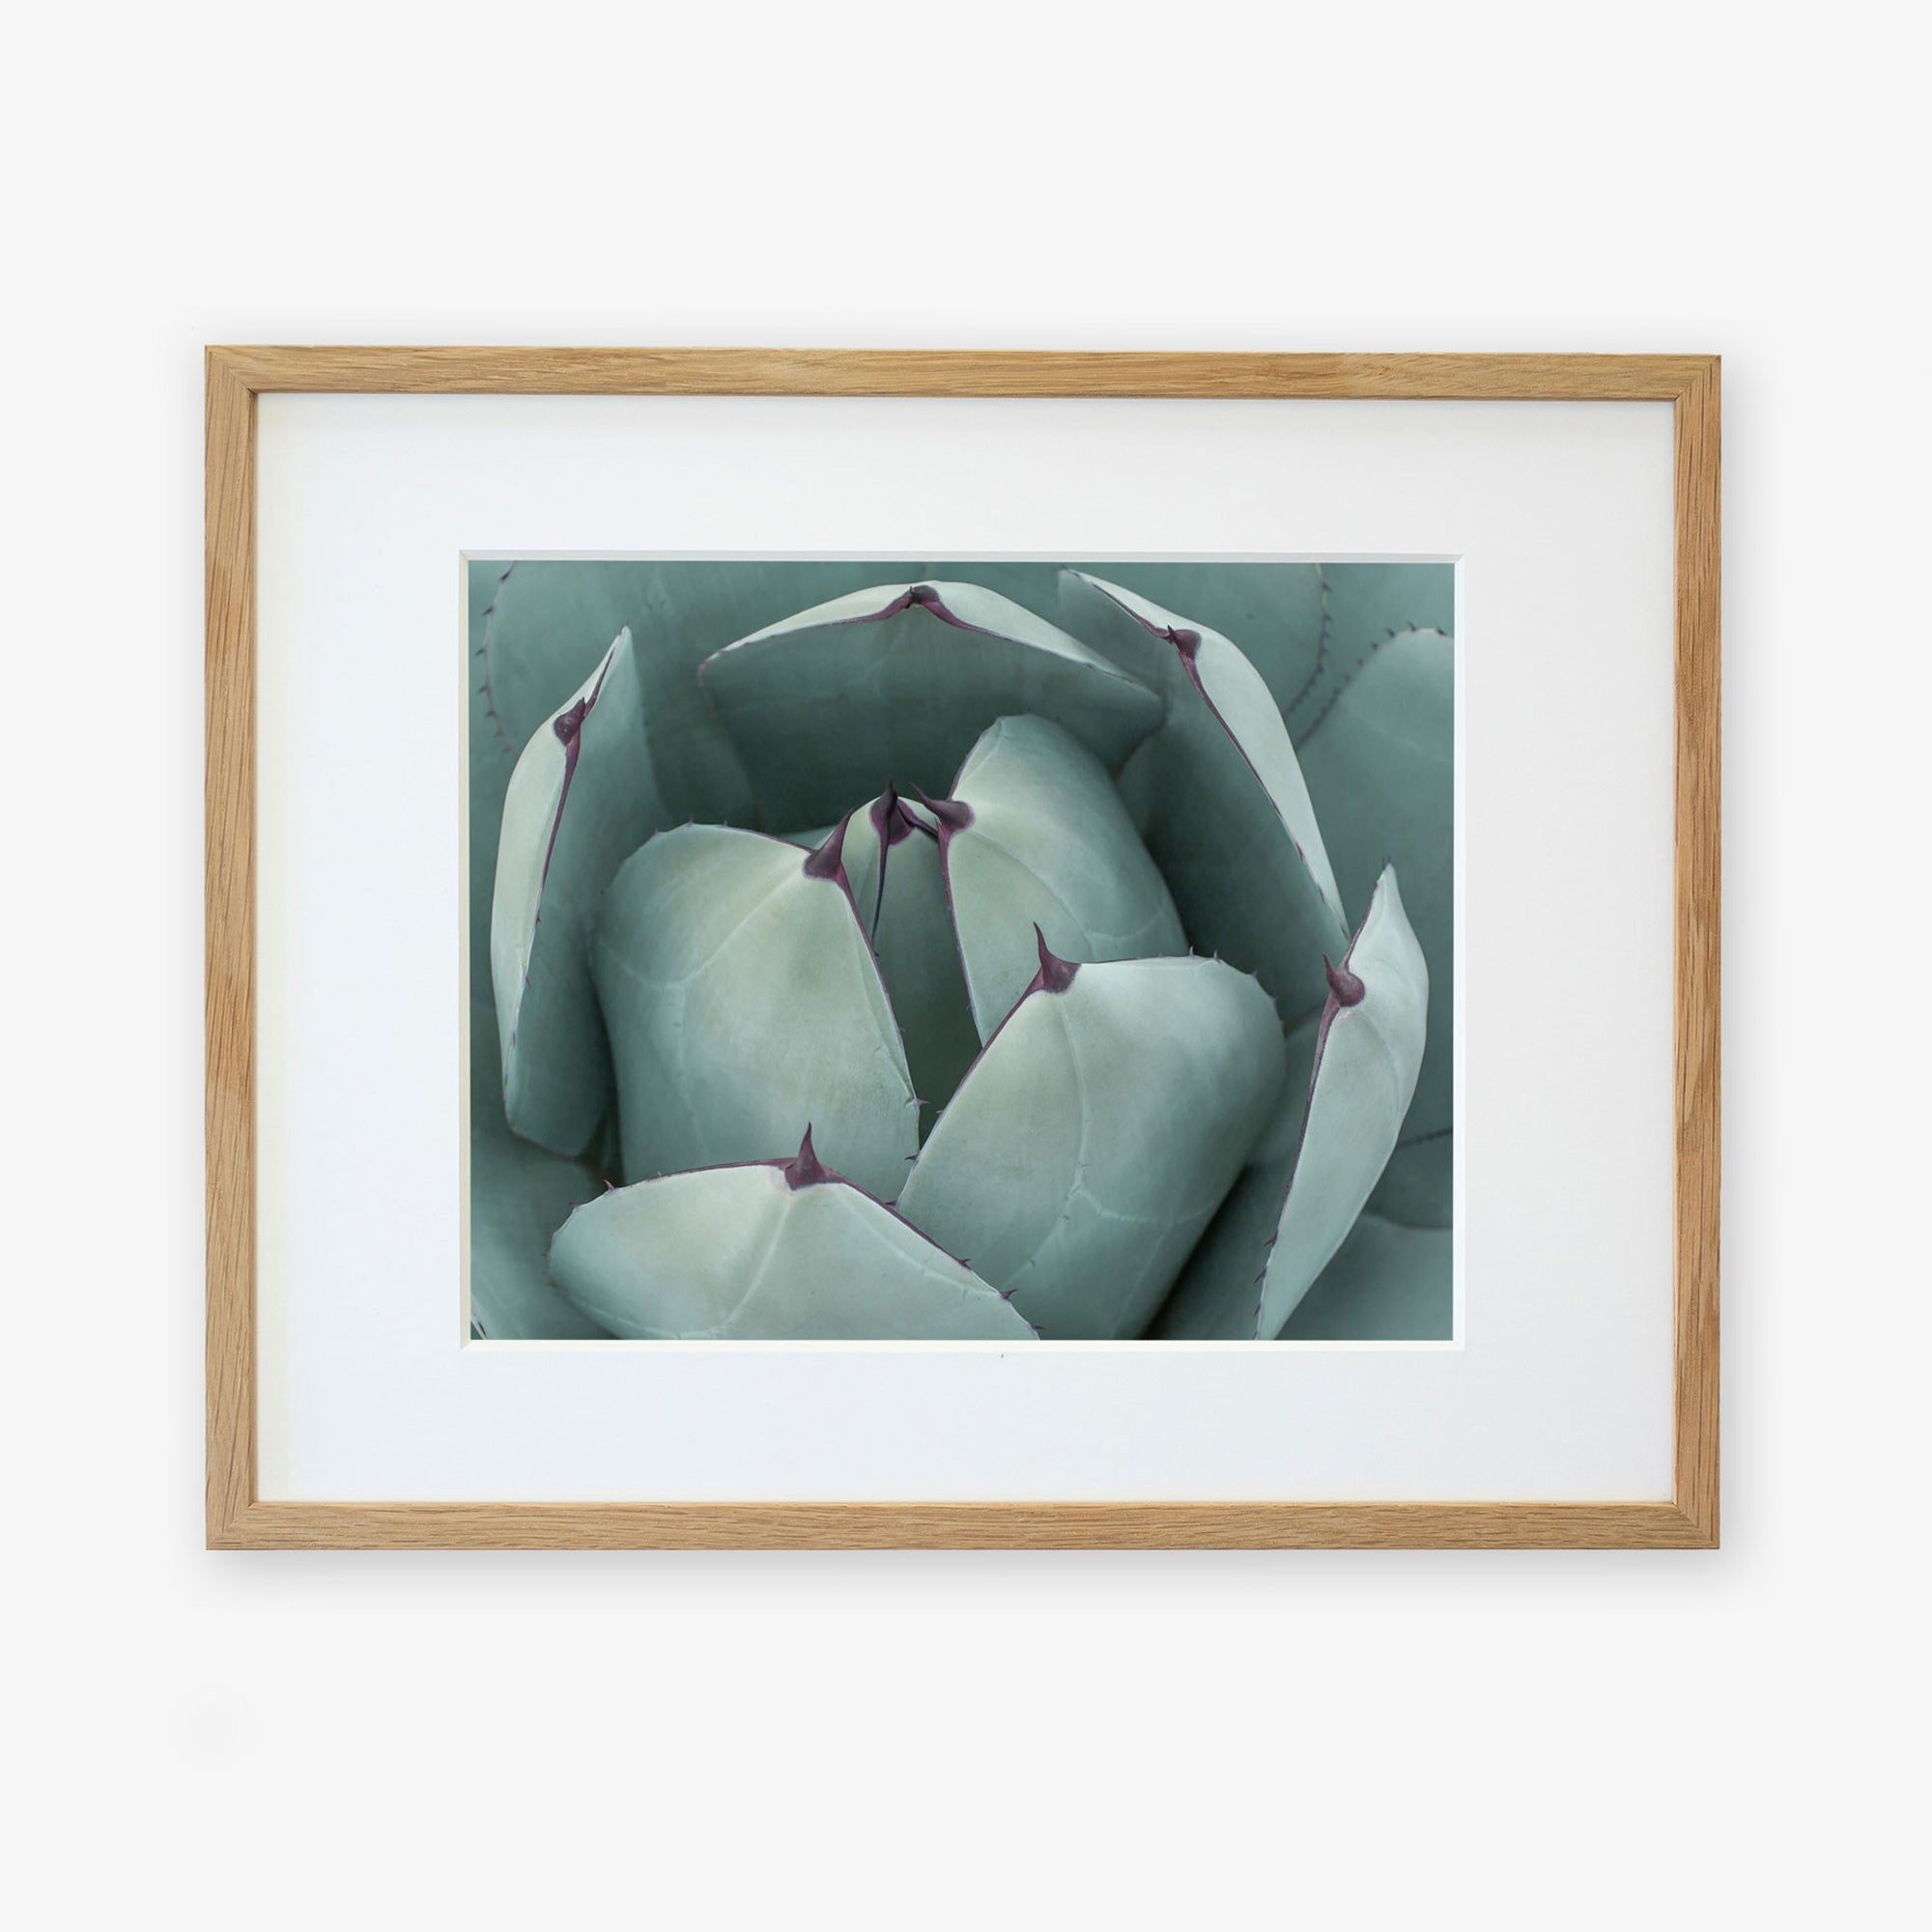 A framed photograph of an Abstract Teal Green Botanical Print, &#39;Teal Petals&#39; by Offley Green, printed on archival photographic paper and displayed against a soft, blurred background.